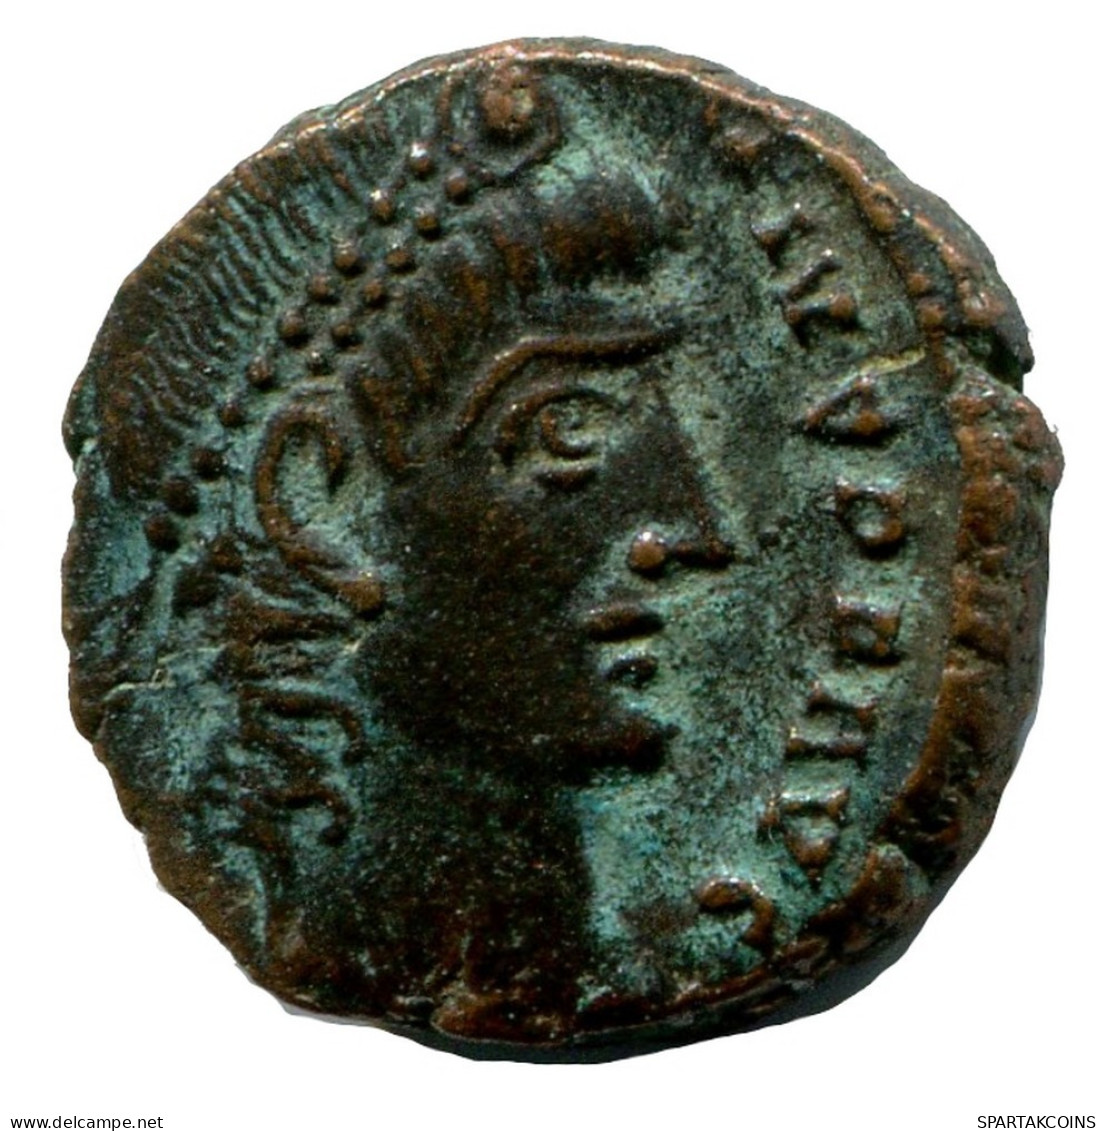 CONSTANTIUS II ALEKSANDRIA FROM THE ROYAL ONTARIO MUSEUM #ANC10196.14.F.A - The Christian Empire (307 AD To 363 AD)